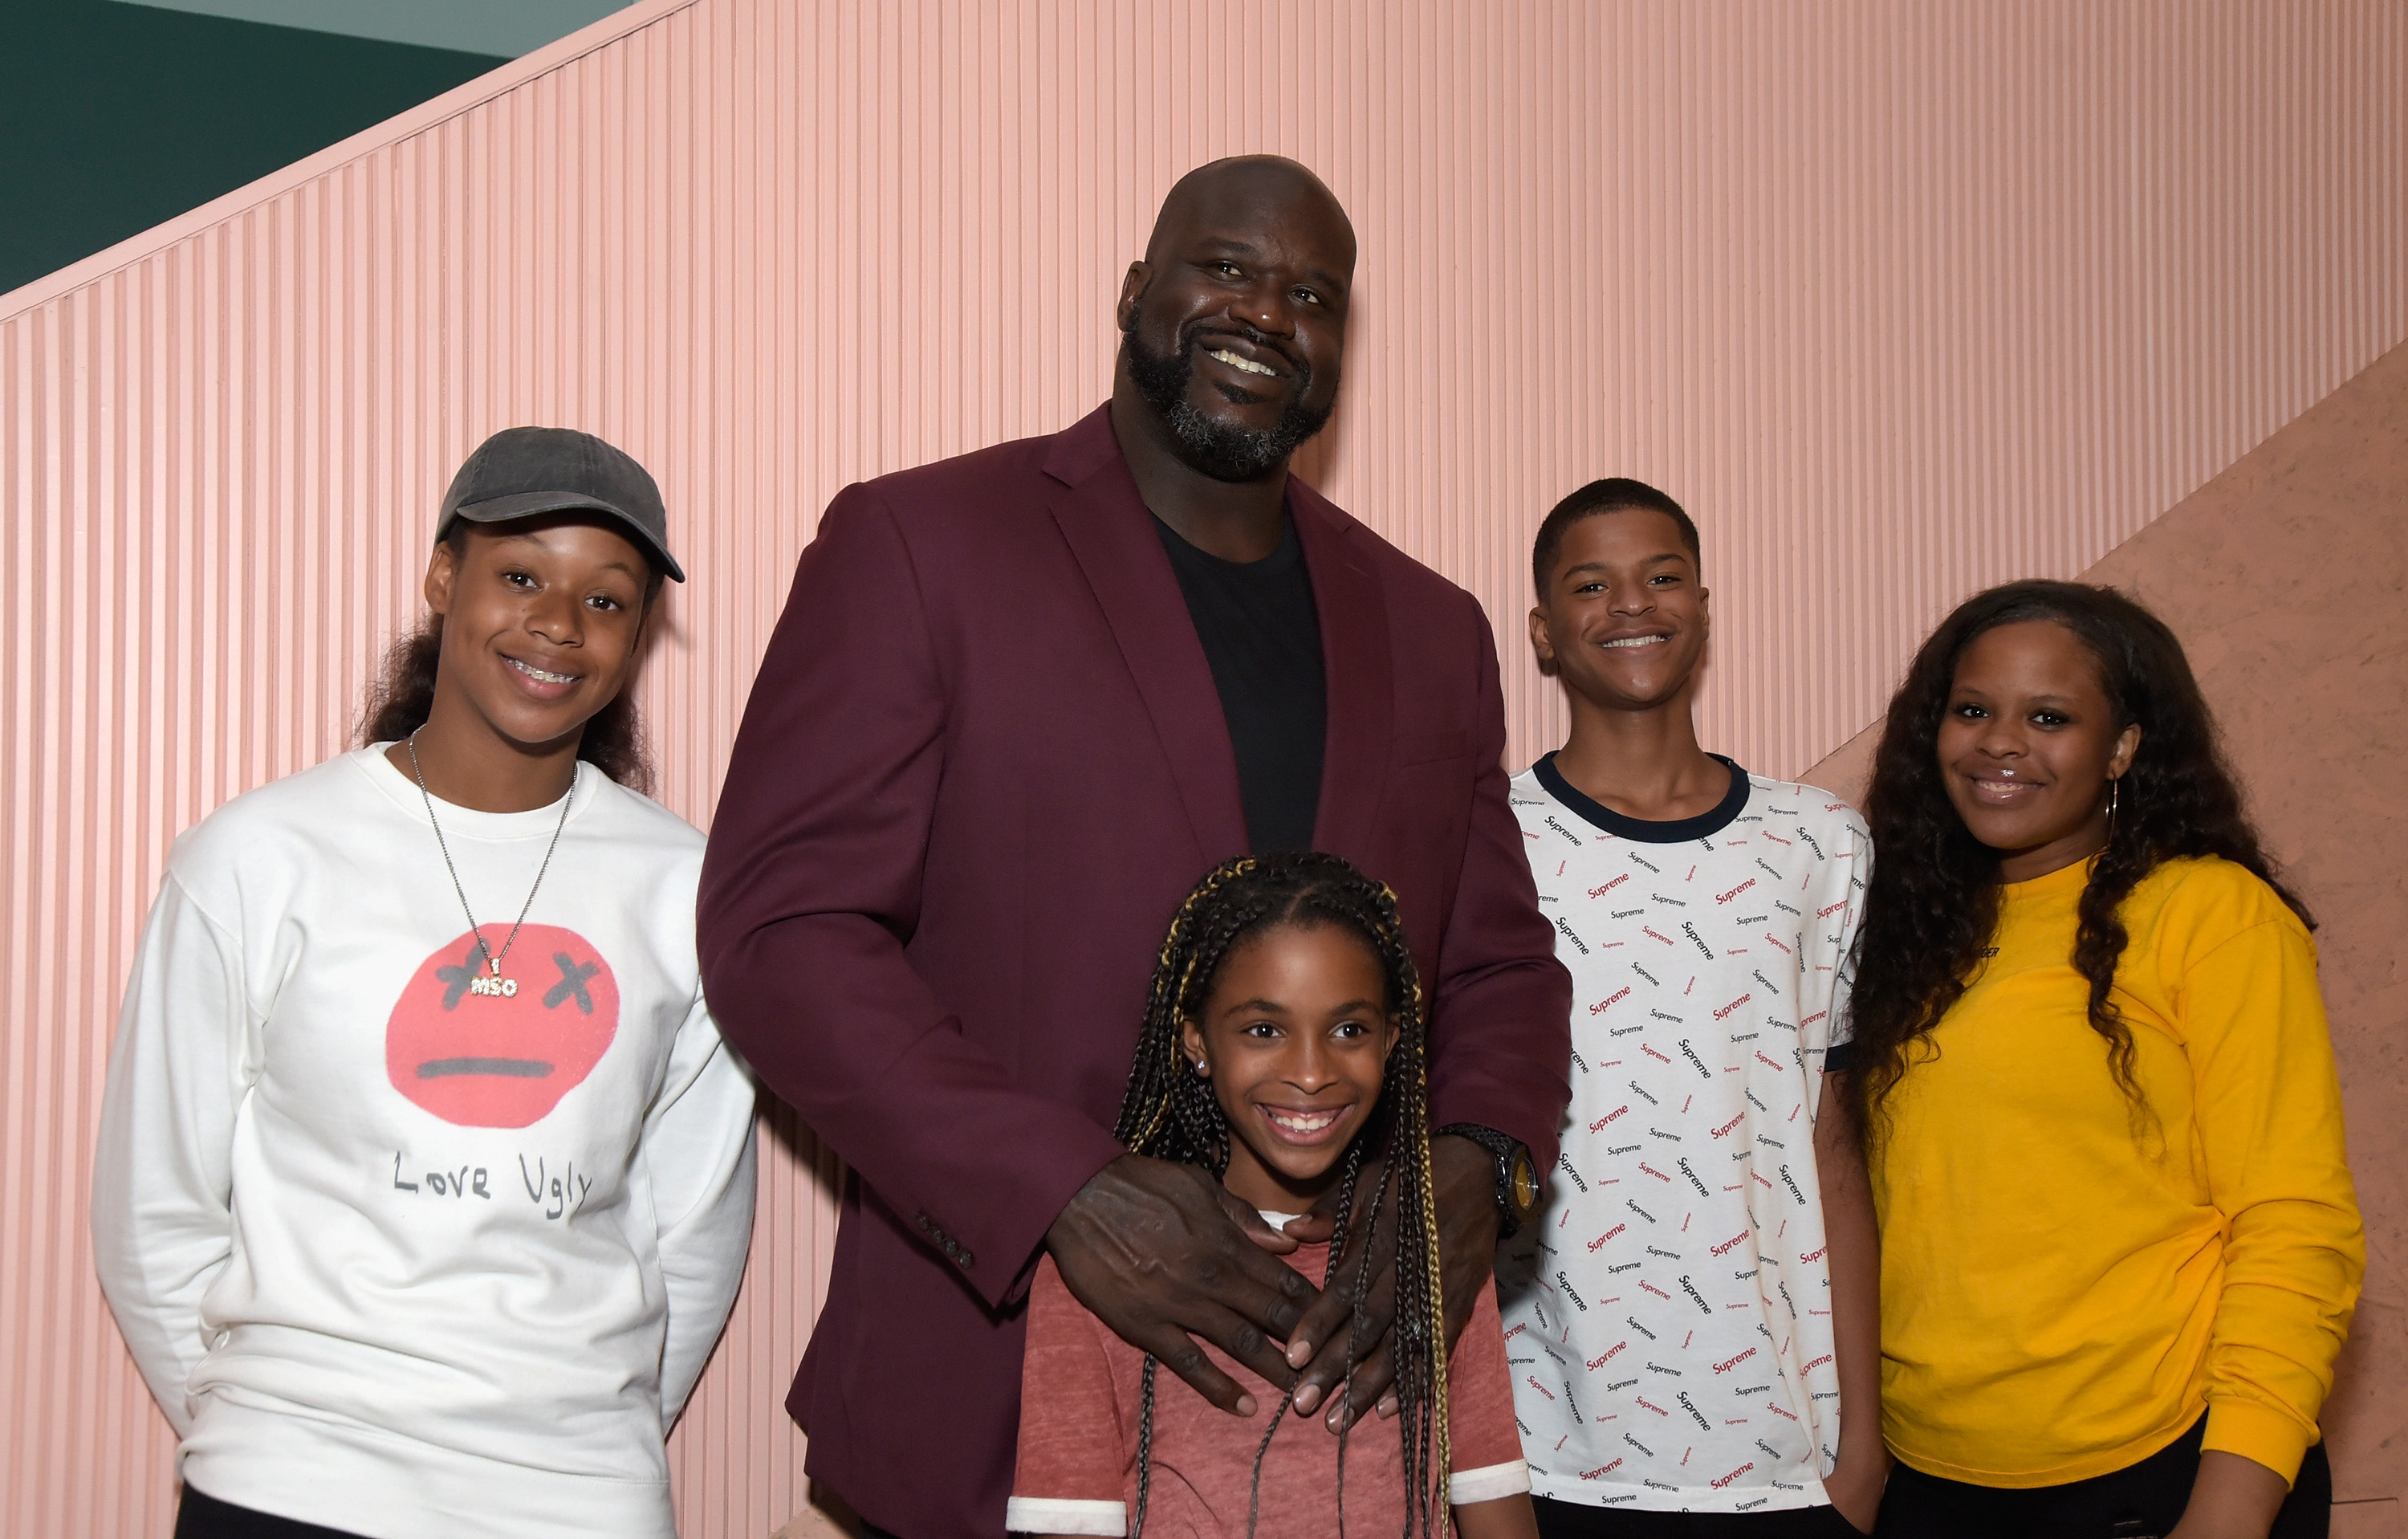 Shaq Isn’t Just Going to Hand His Massive Fortune Over to His Kids